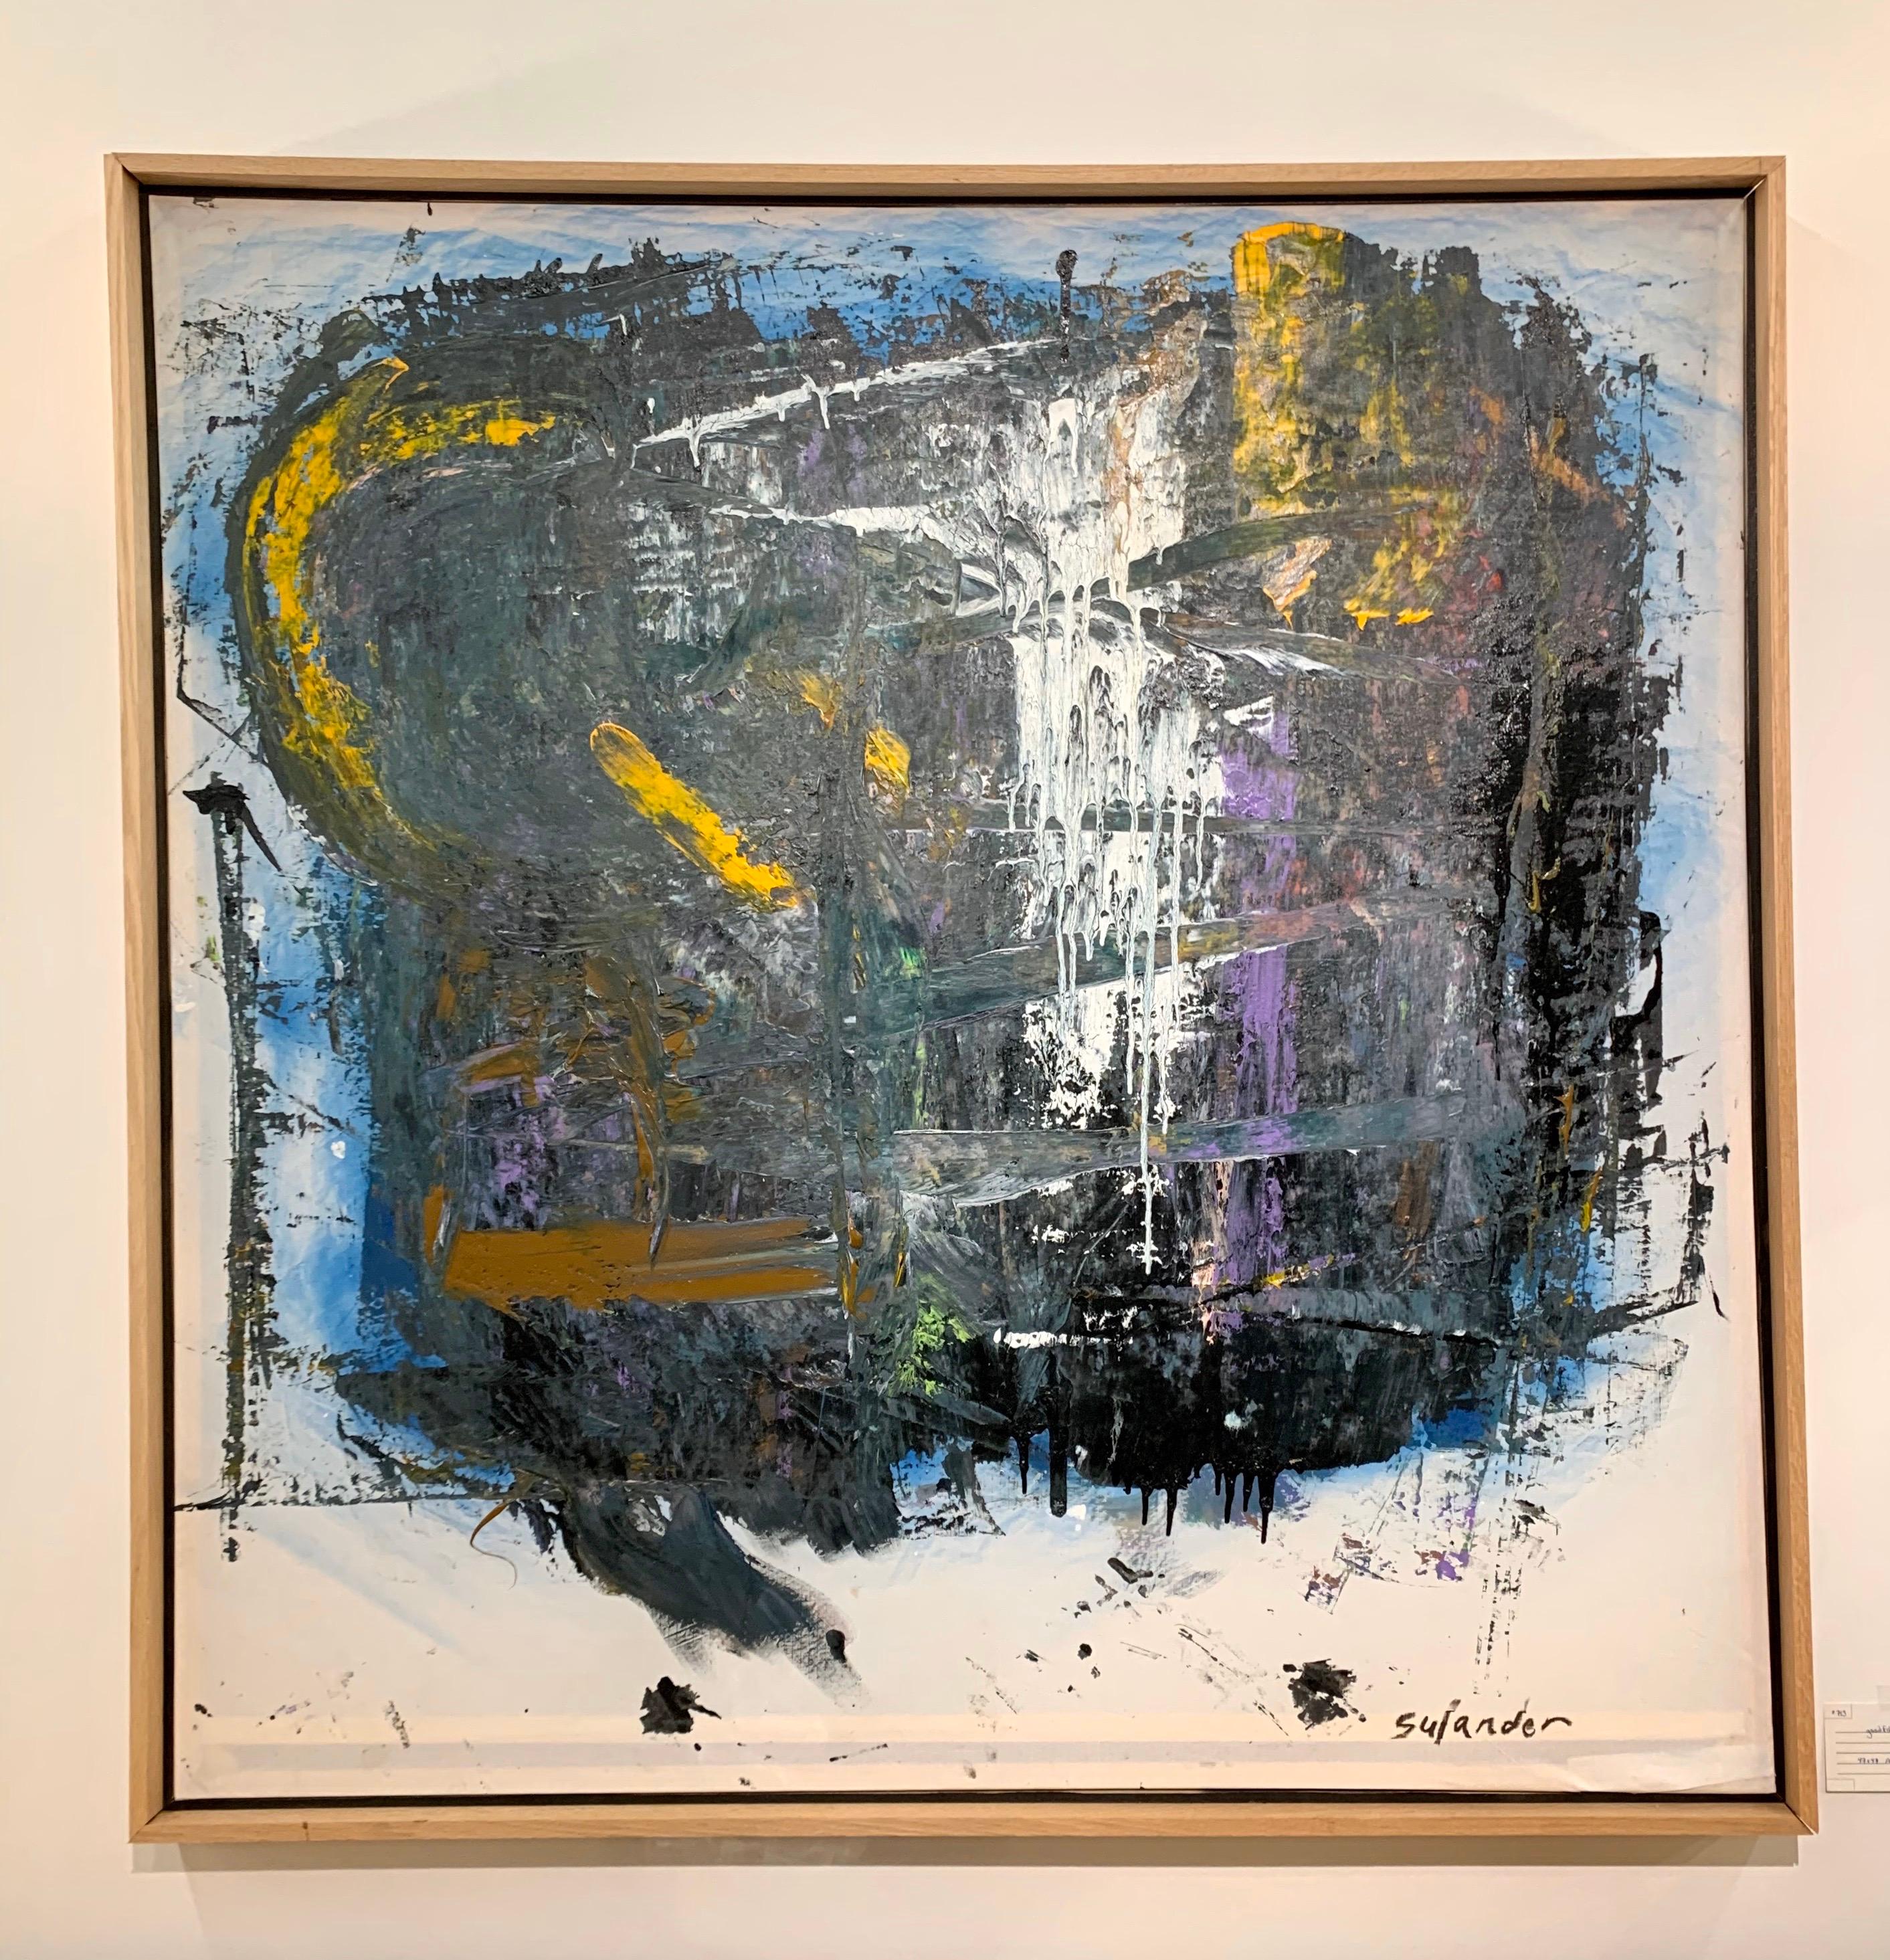 Elegant original acrylic on nylon canvas framed painting signed by the artist Sulander. Ready to hang.
Gorgeous color scheme for any pallet. An iconic contemporary abstract work of art.